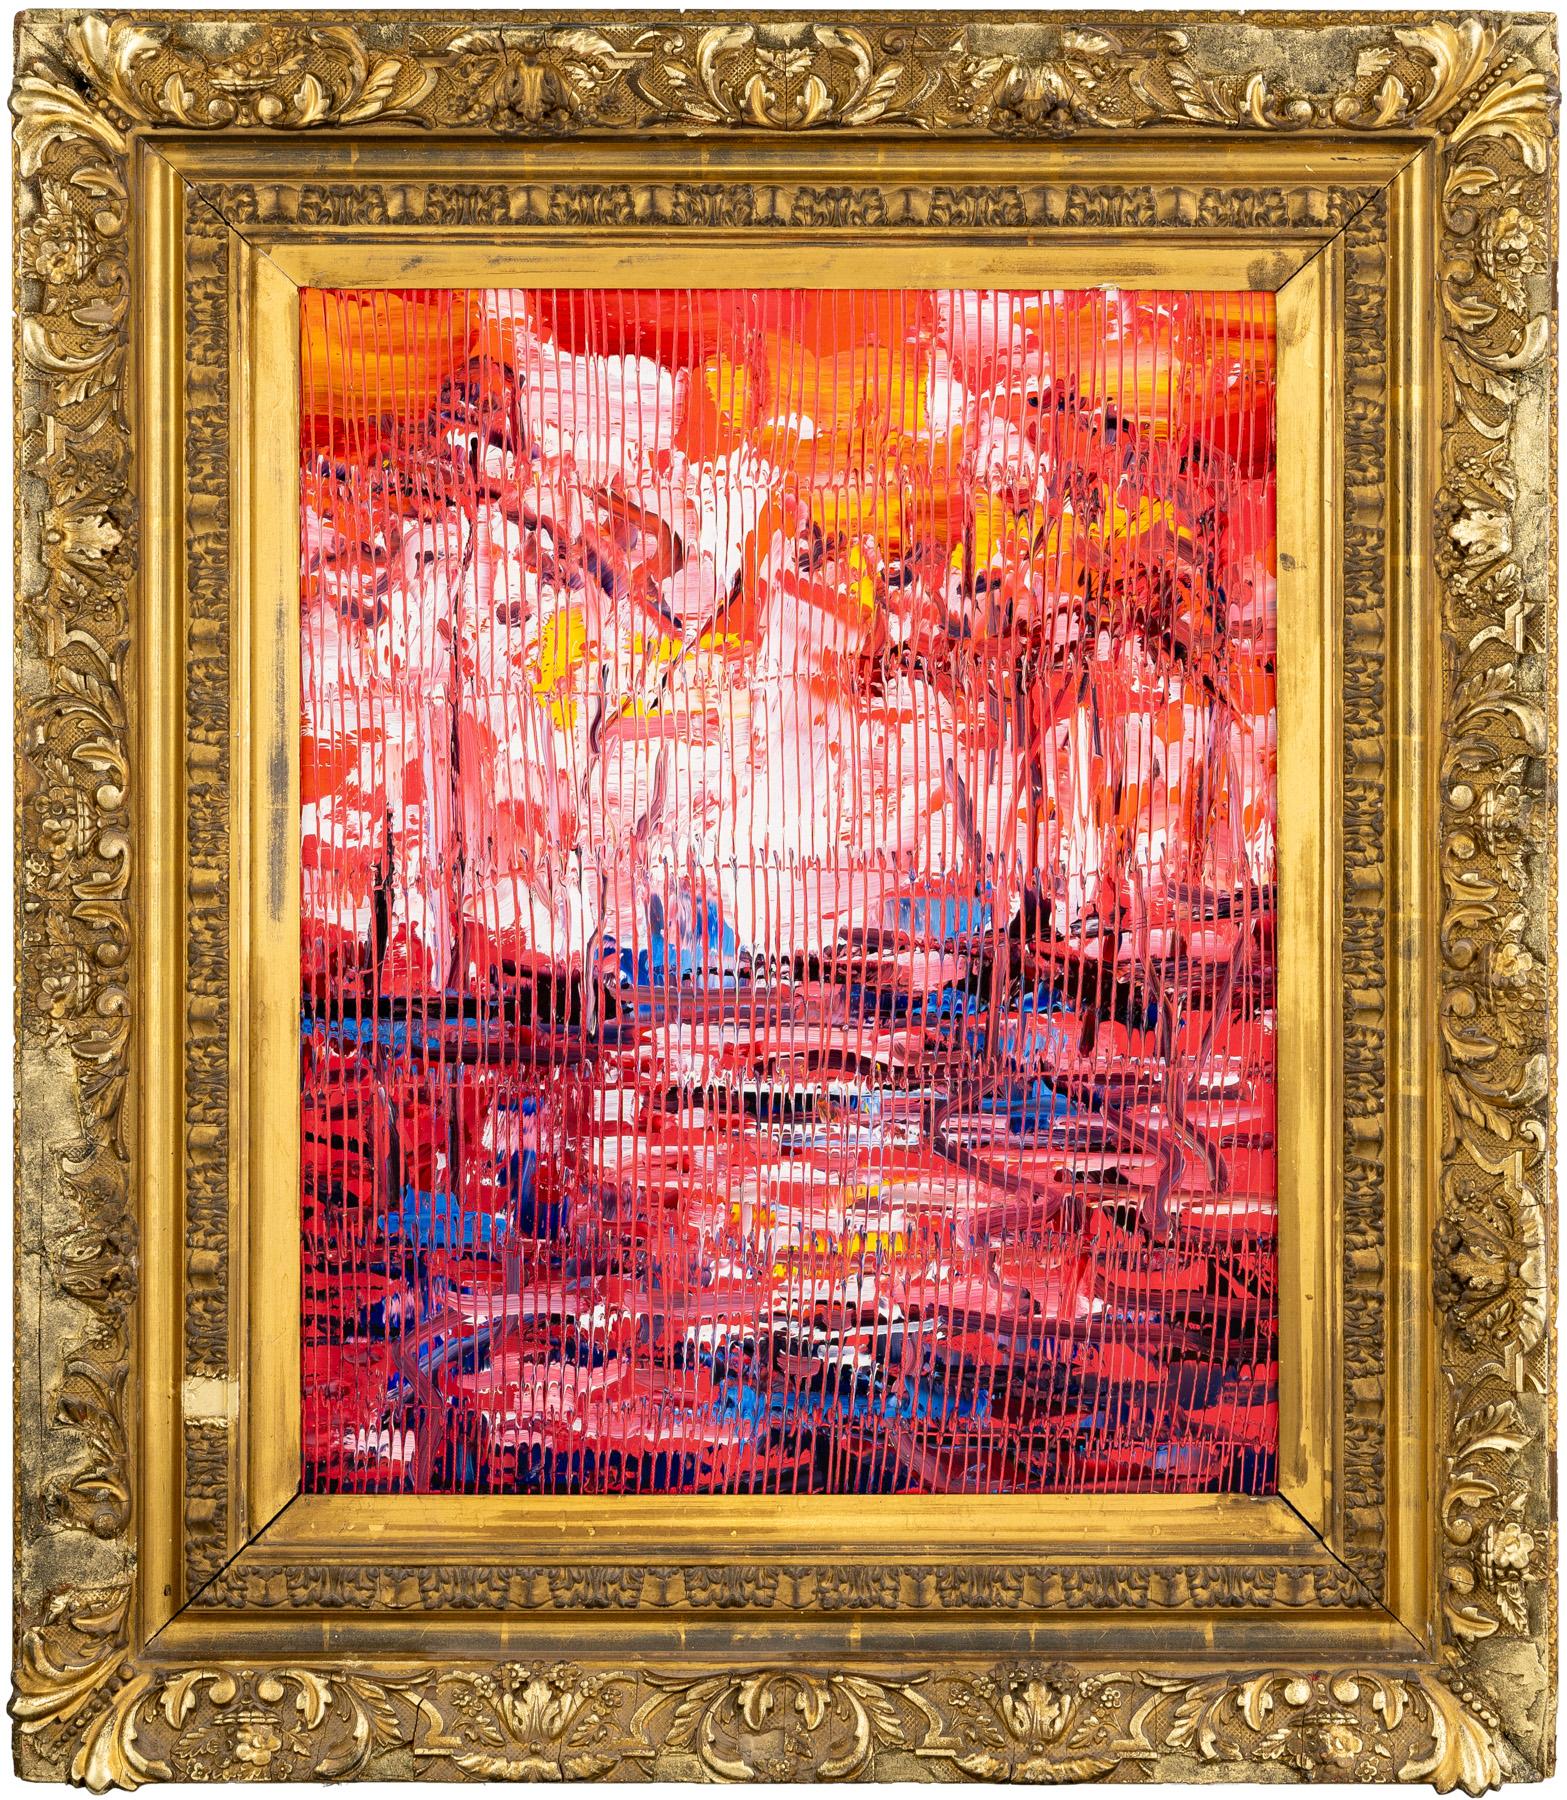 Hunt Slonem "Red Bayou Teche" Landscape
Abstract landscape painting featuring shades of red, pink, orange, and blues framed in an antique gold frame.

Unframed: 22.5 x 18.5 inches
Framed: 31.5 x 27.5 inches
*Painting is framed - Please note Hunt